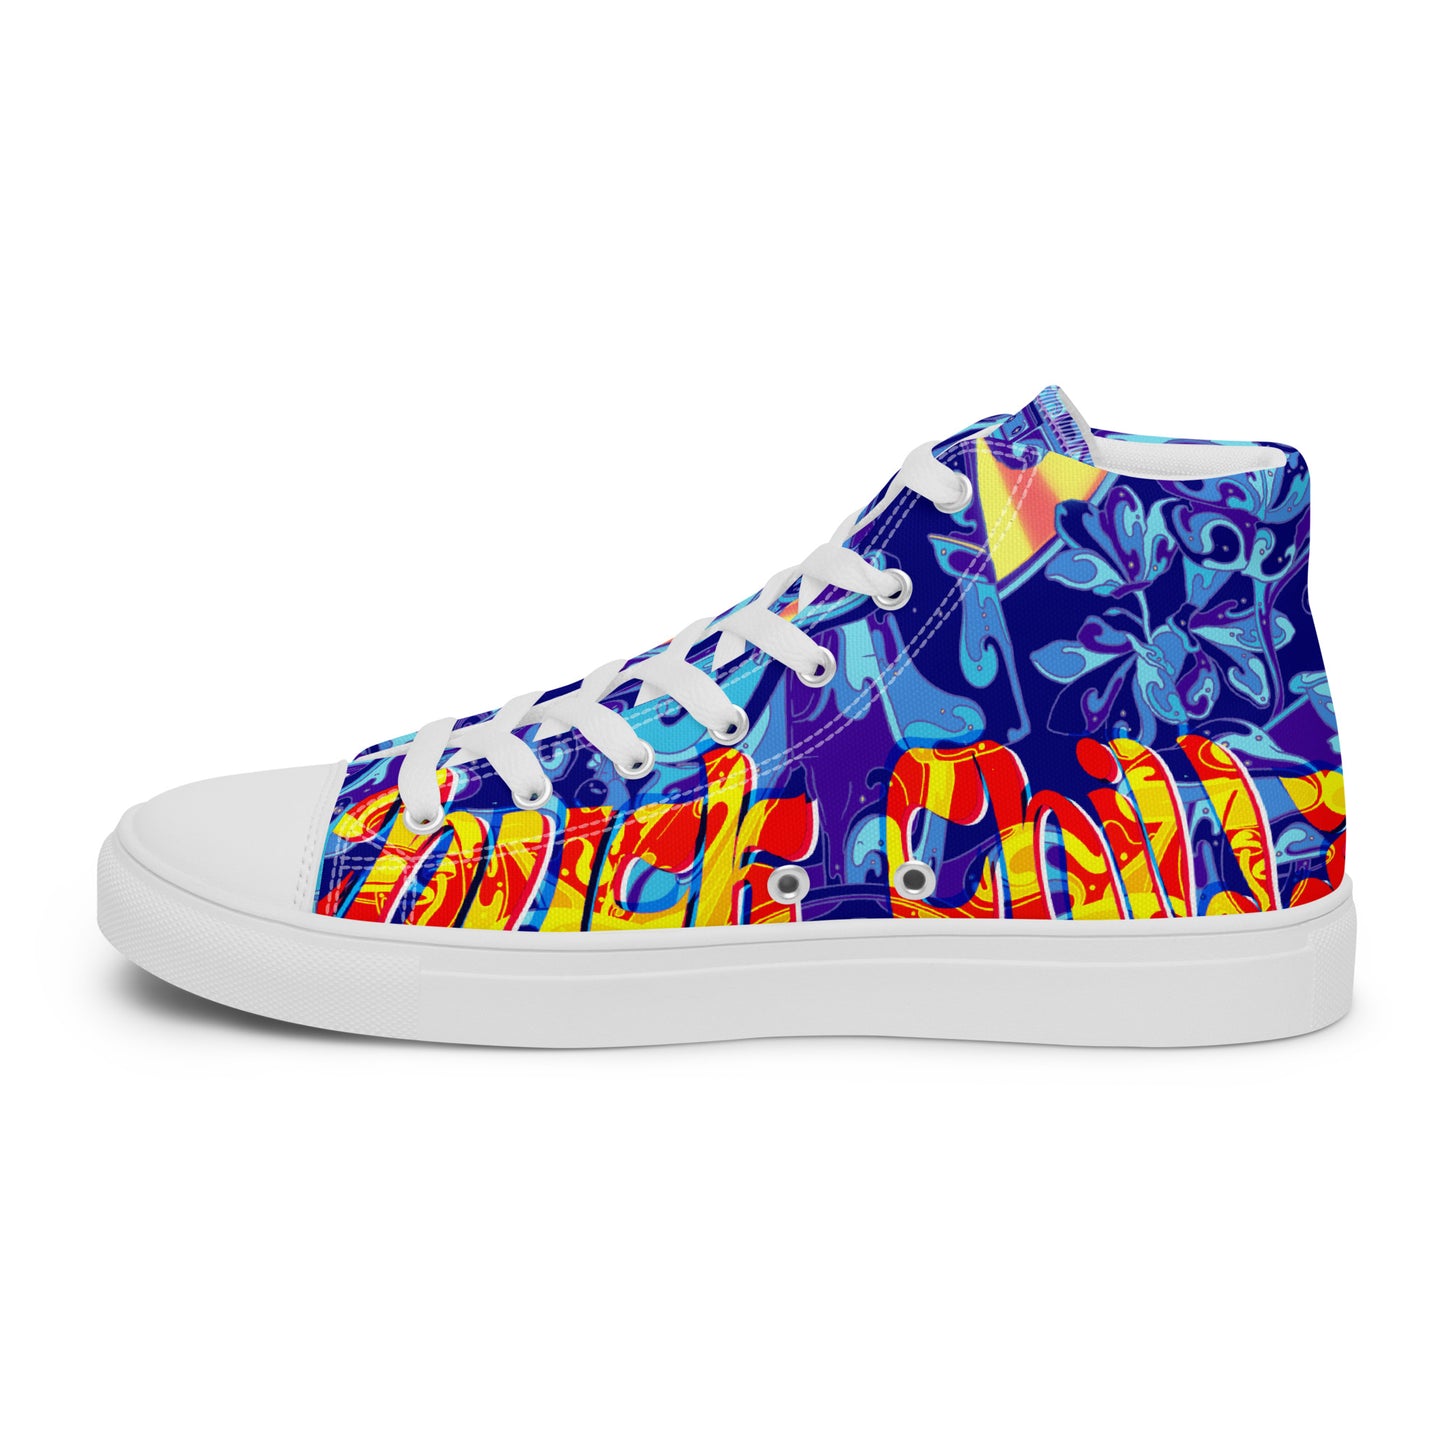 EntheoCosm Shoes - Yellow Sun Inspired High Top Canvas womens shoes